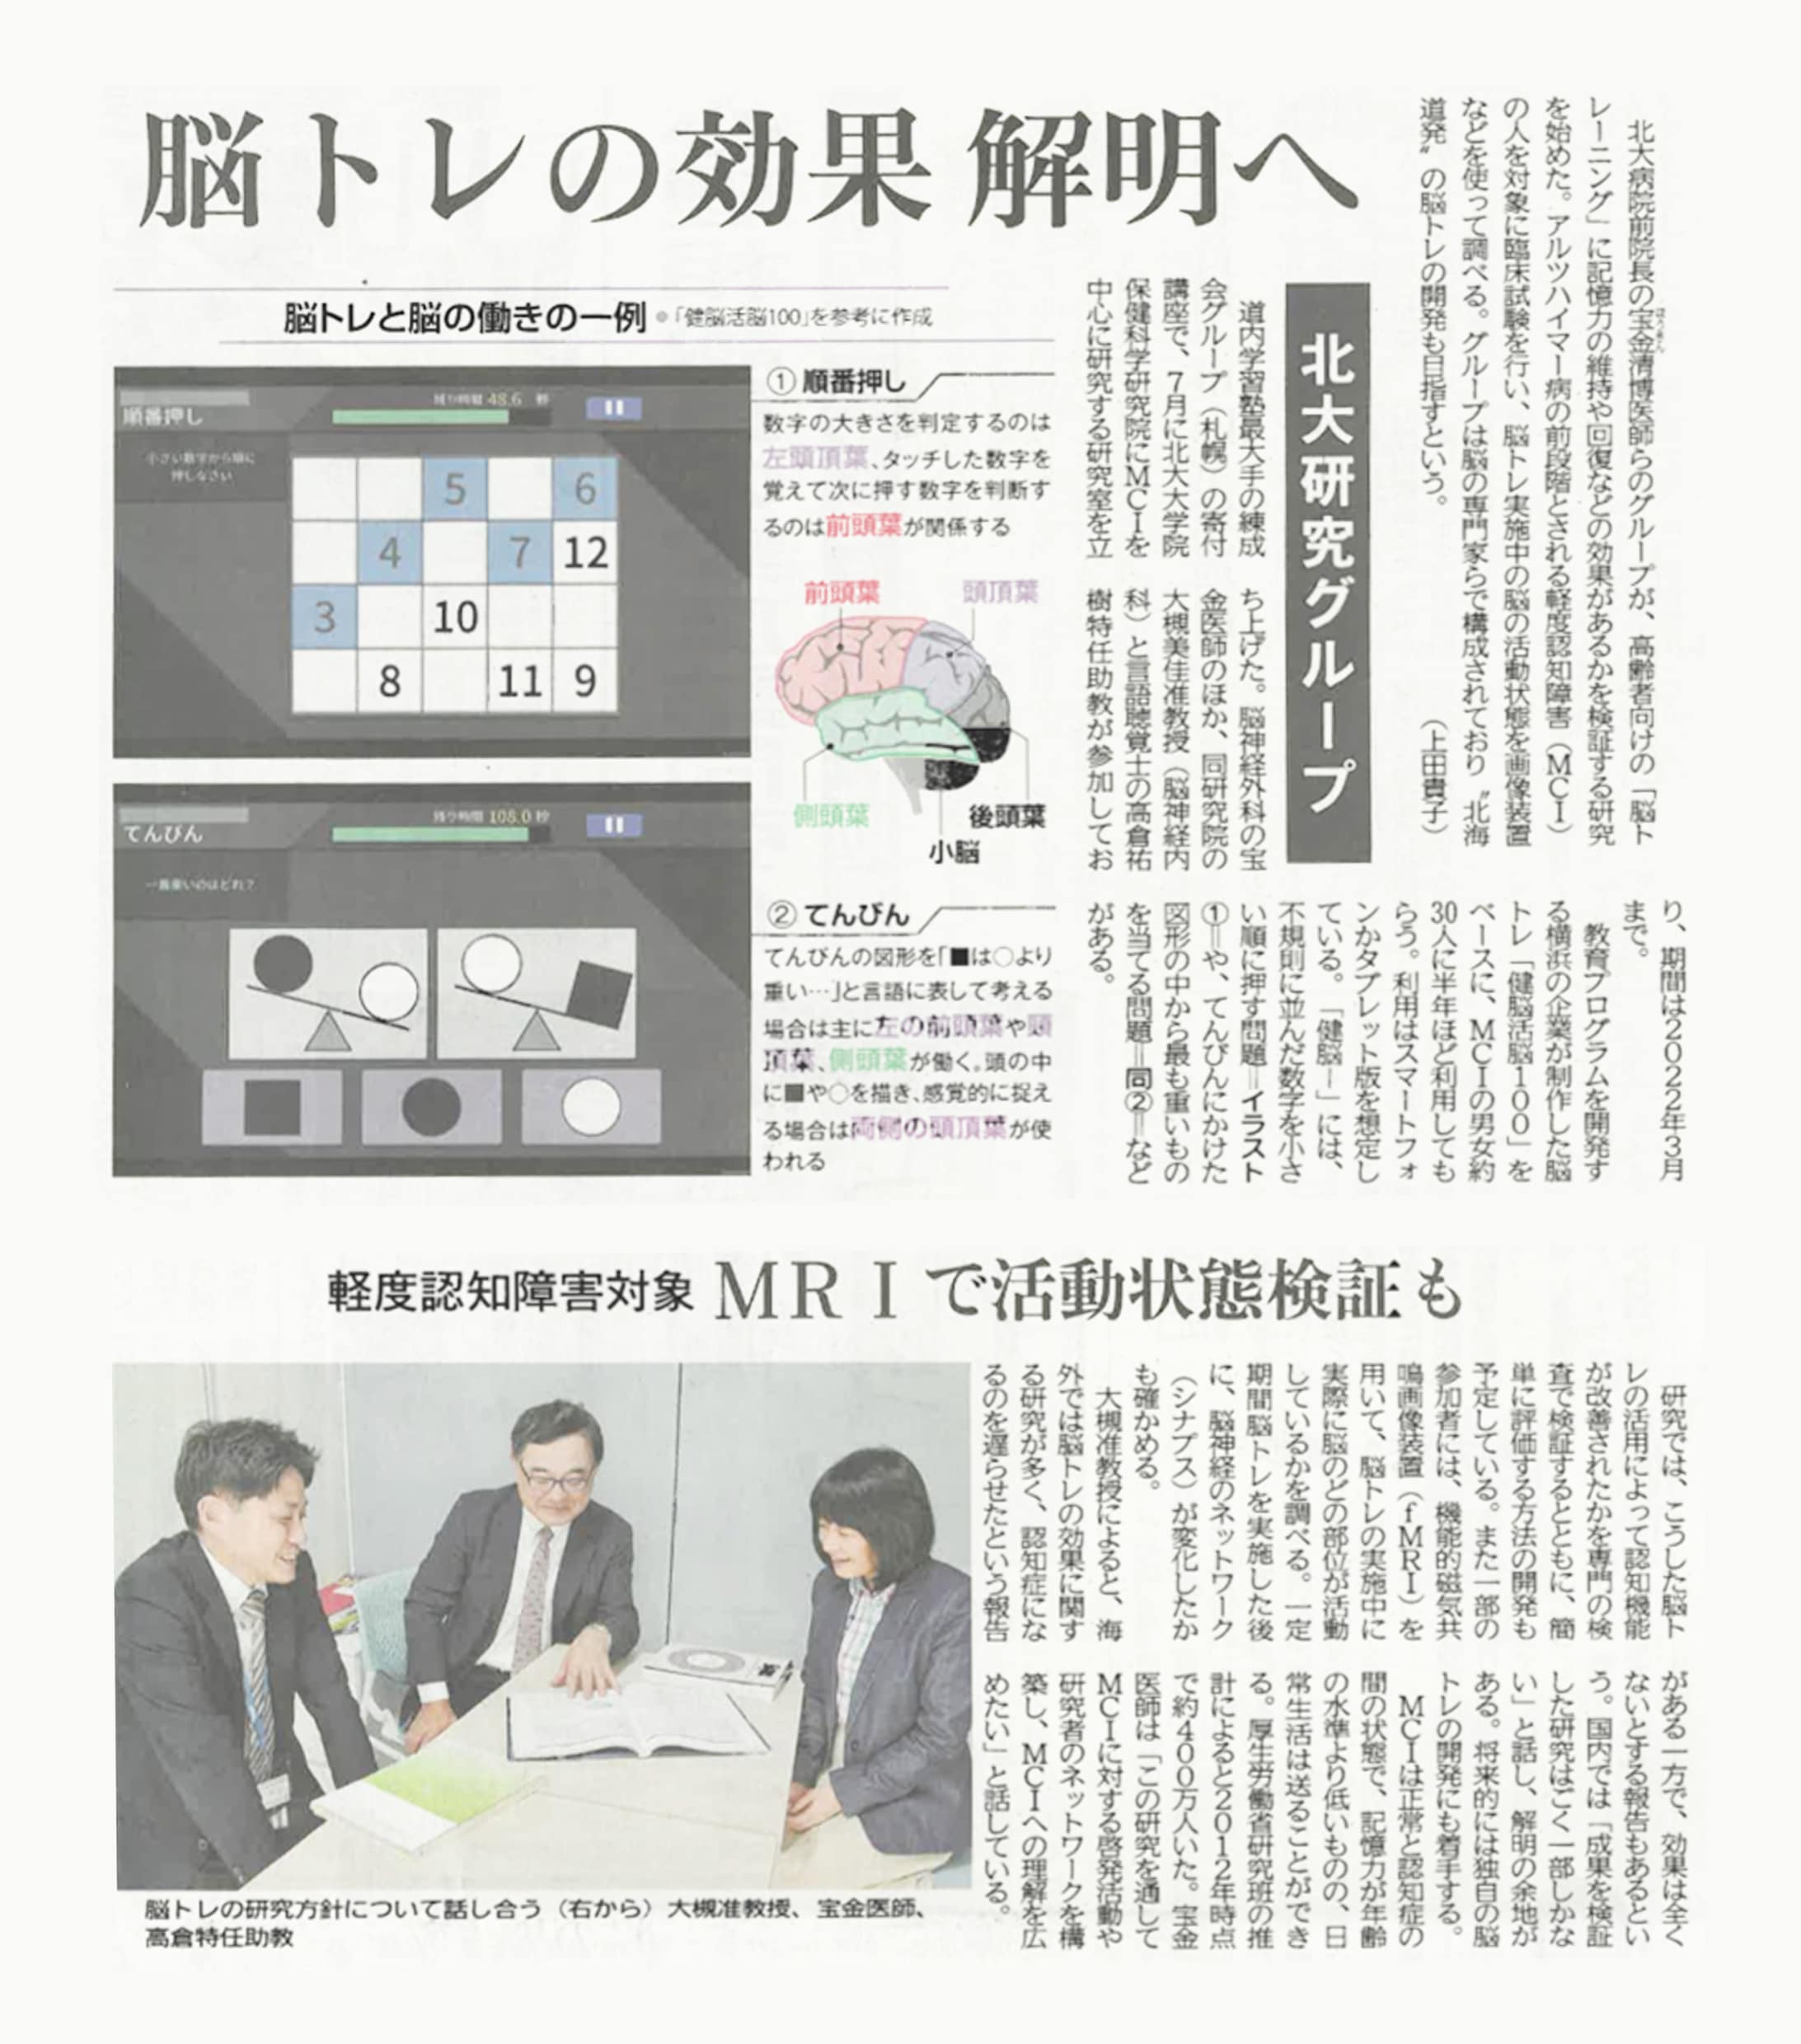 You are currently viewing パズル道場のメソッドを北海道大学医学部の専門の研究室が臨床実験